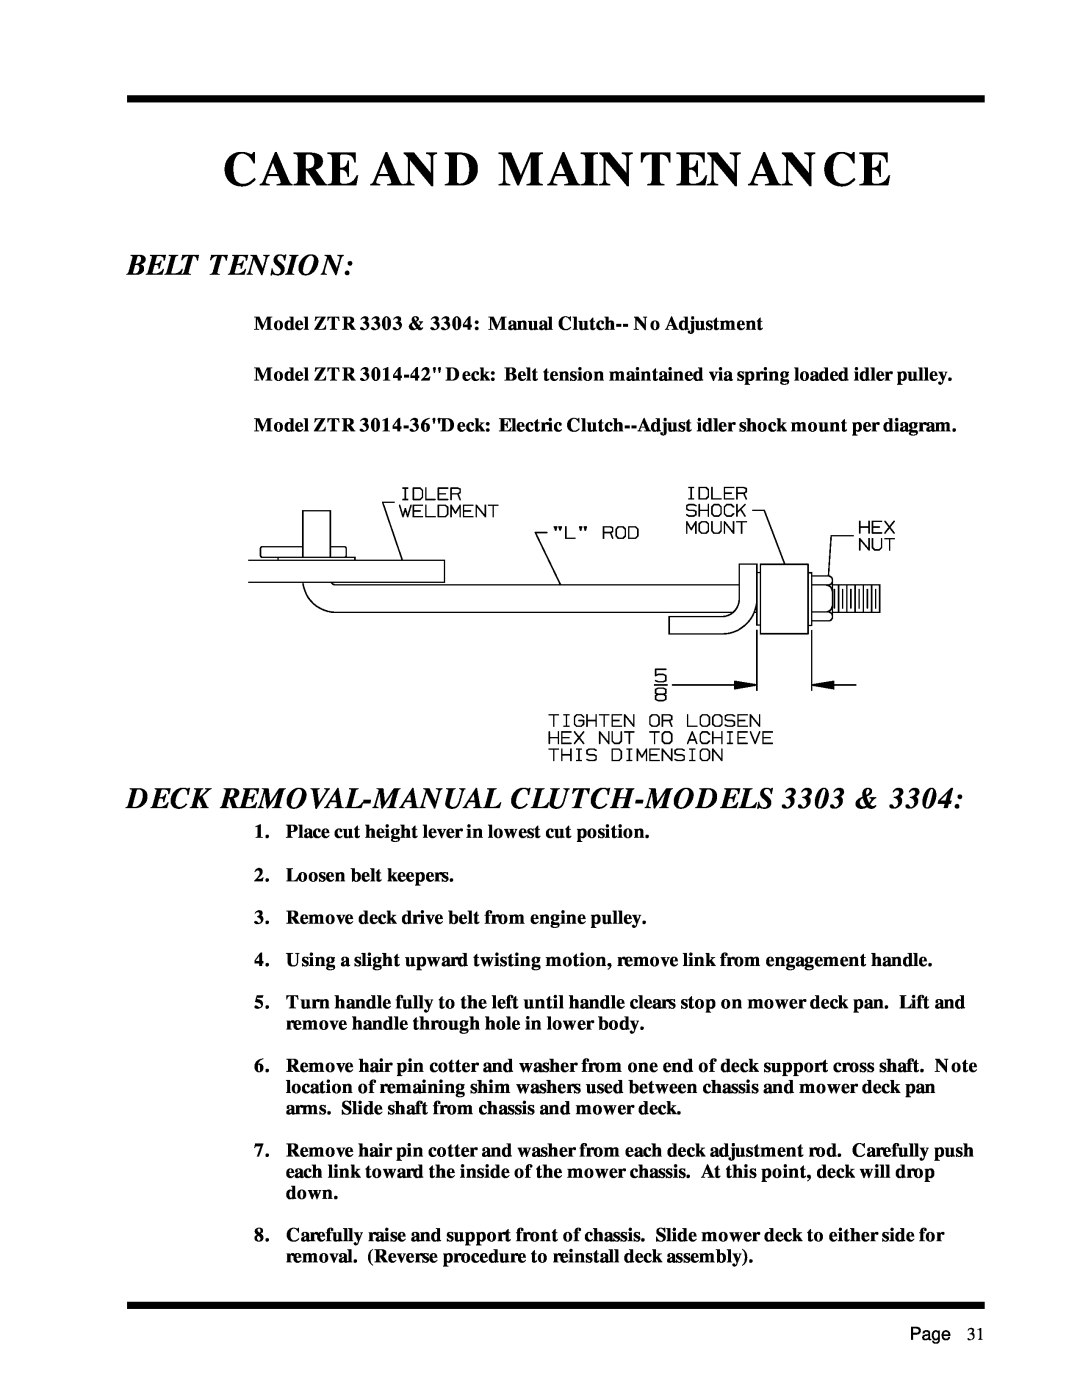 Dixon ZTR 2301 manual Belt Tension, Deck Removal-Manual Clutch-Models, Care And Maintenance 